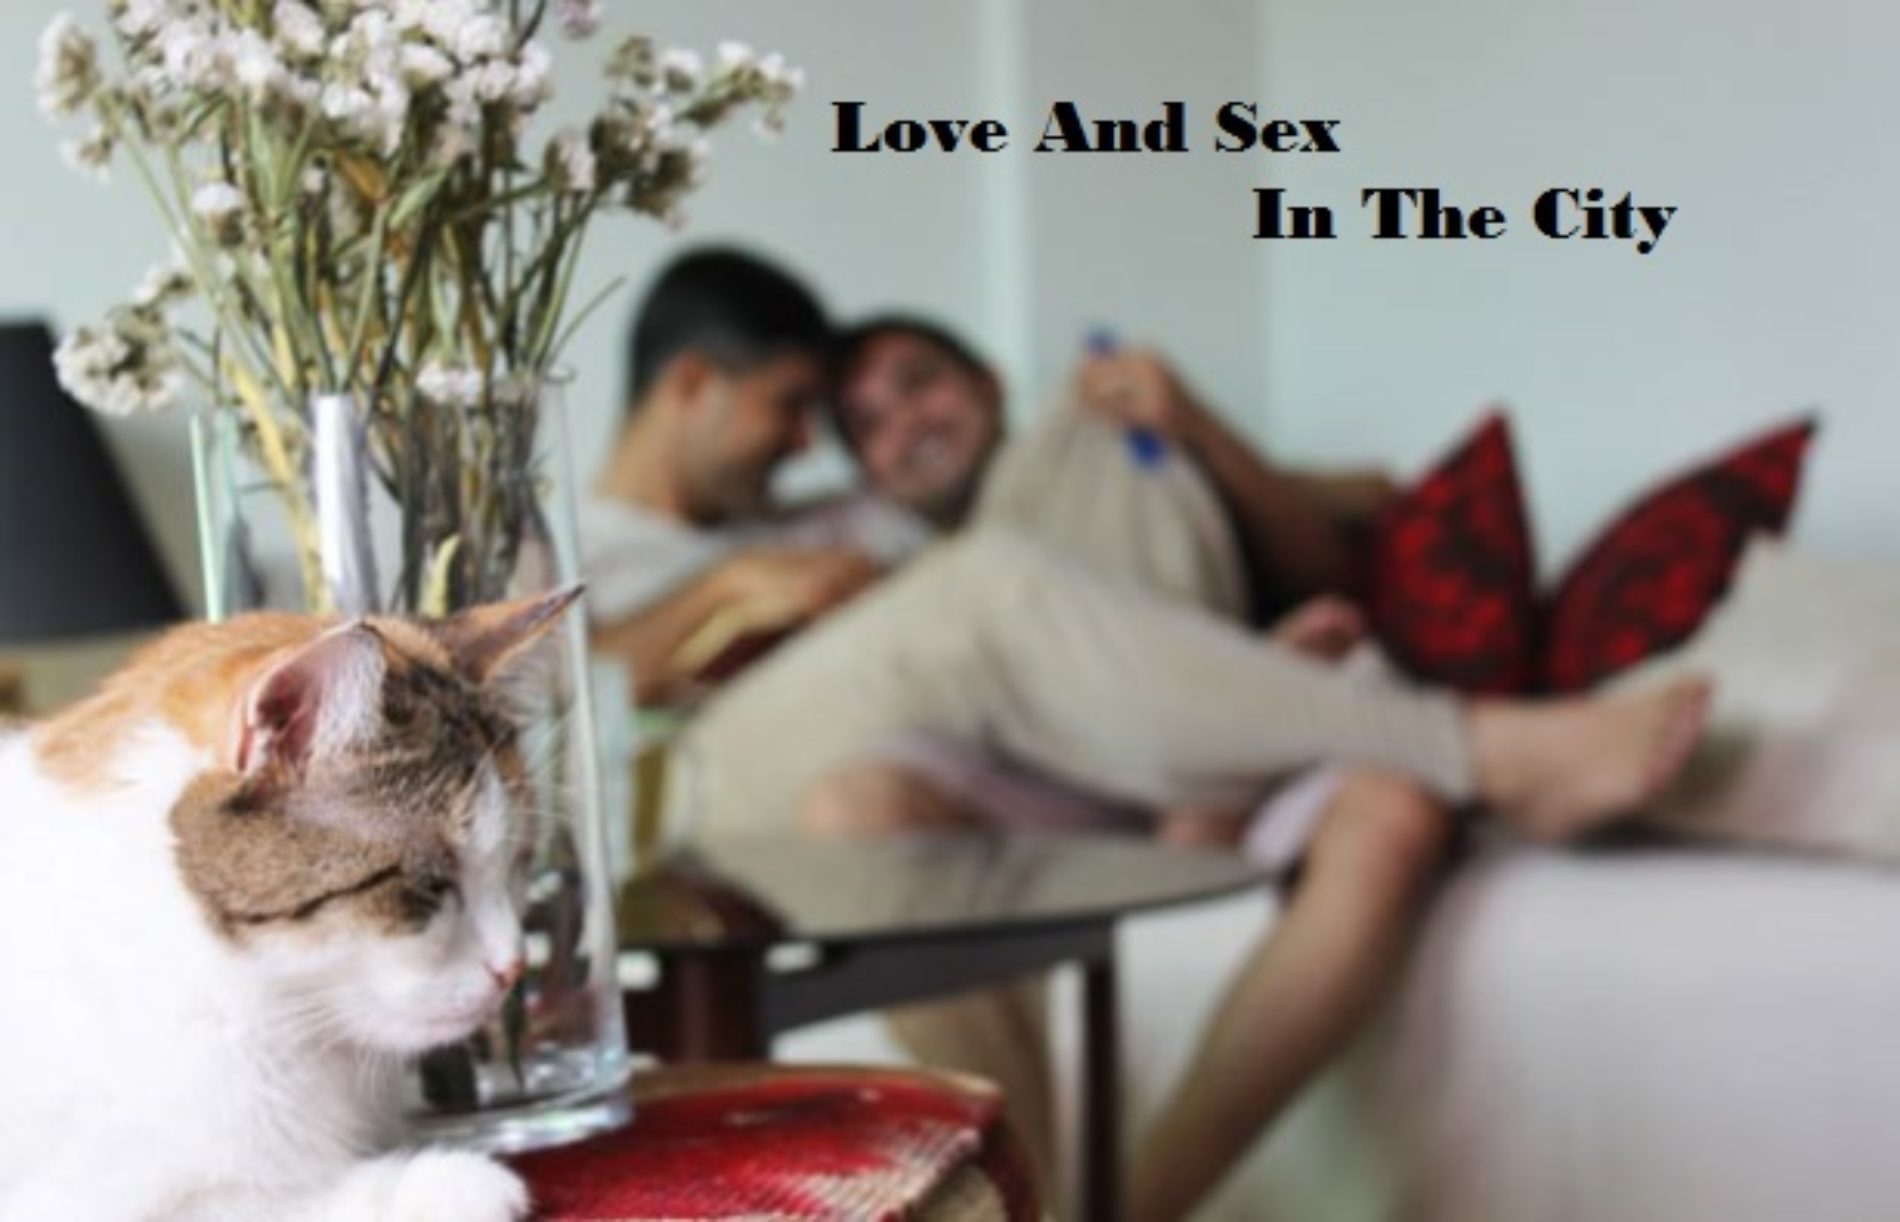 LOVE AND SEX IN THE CITY (Episode 56)